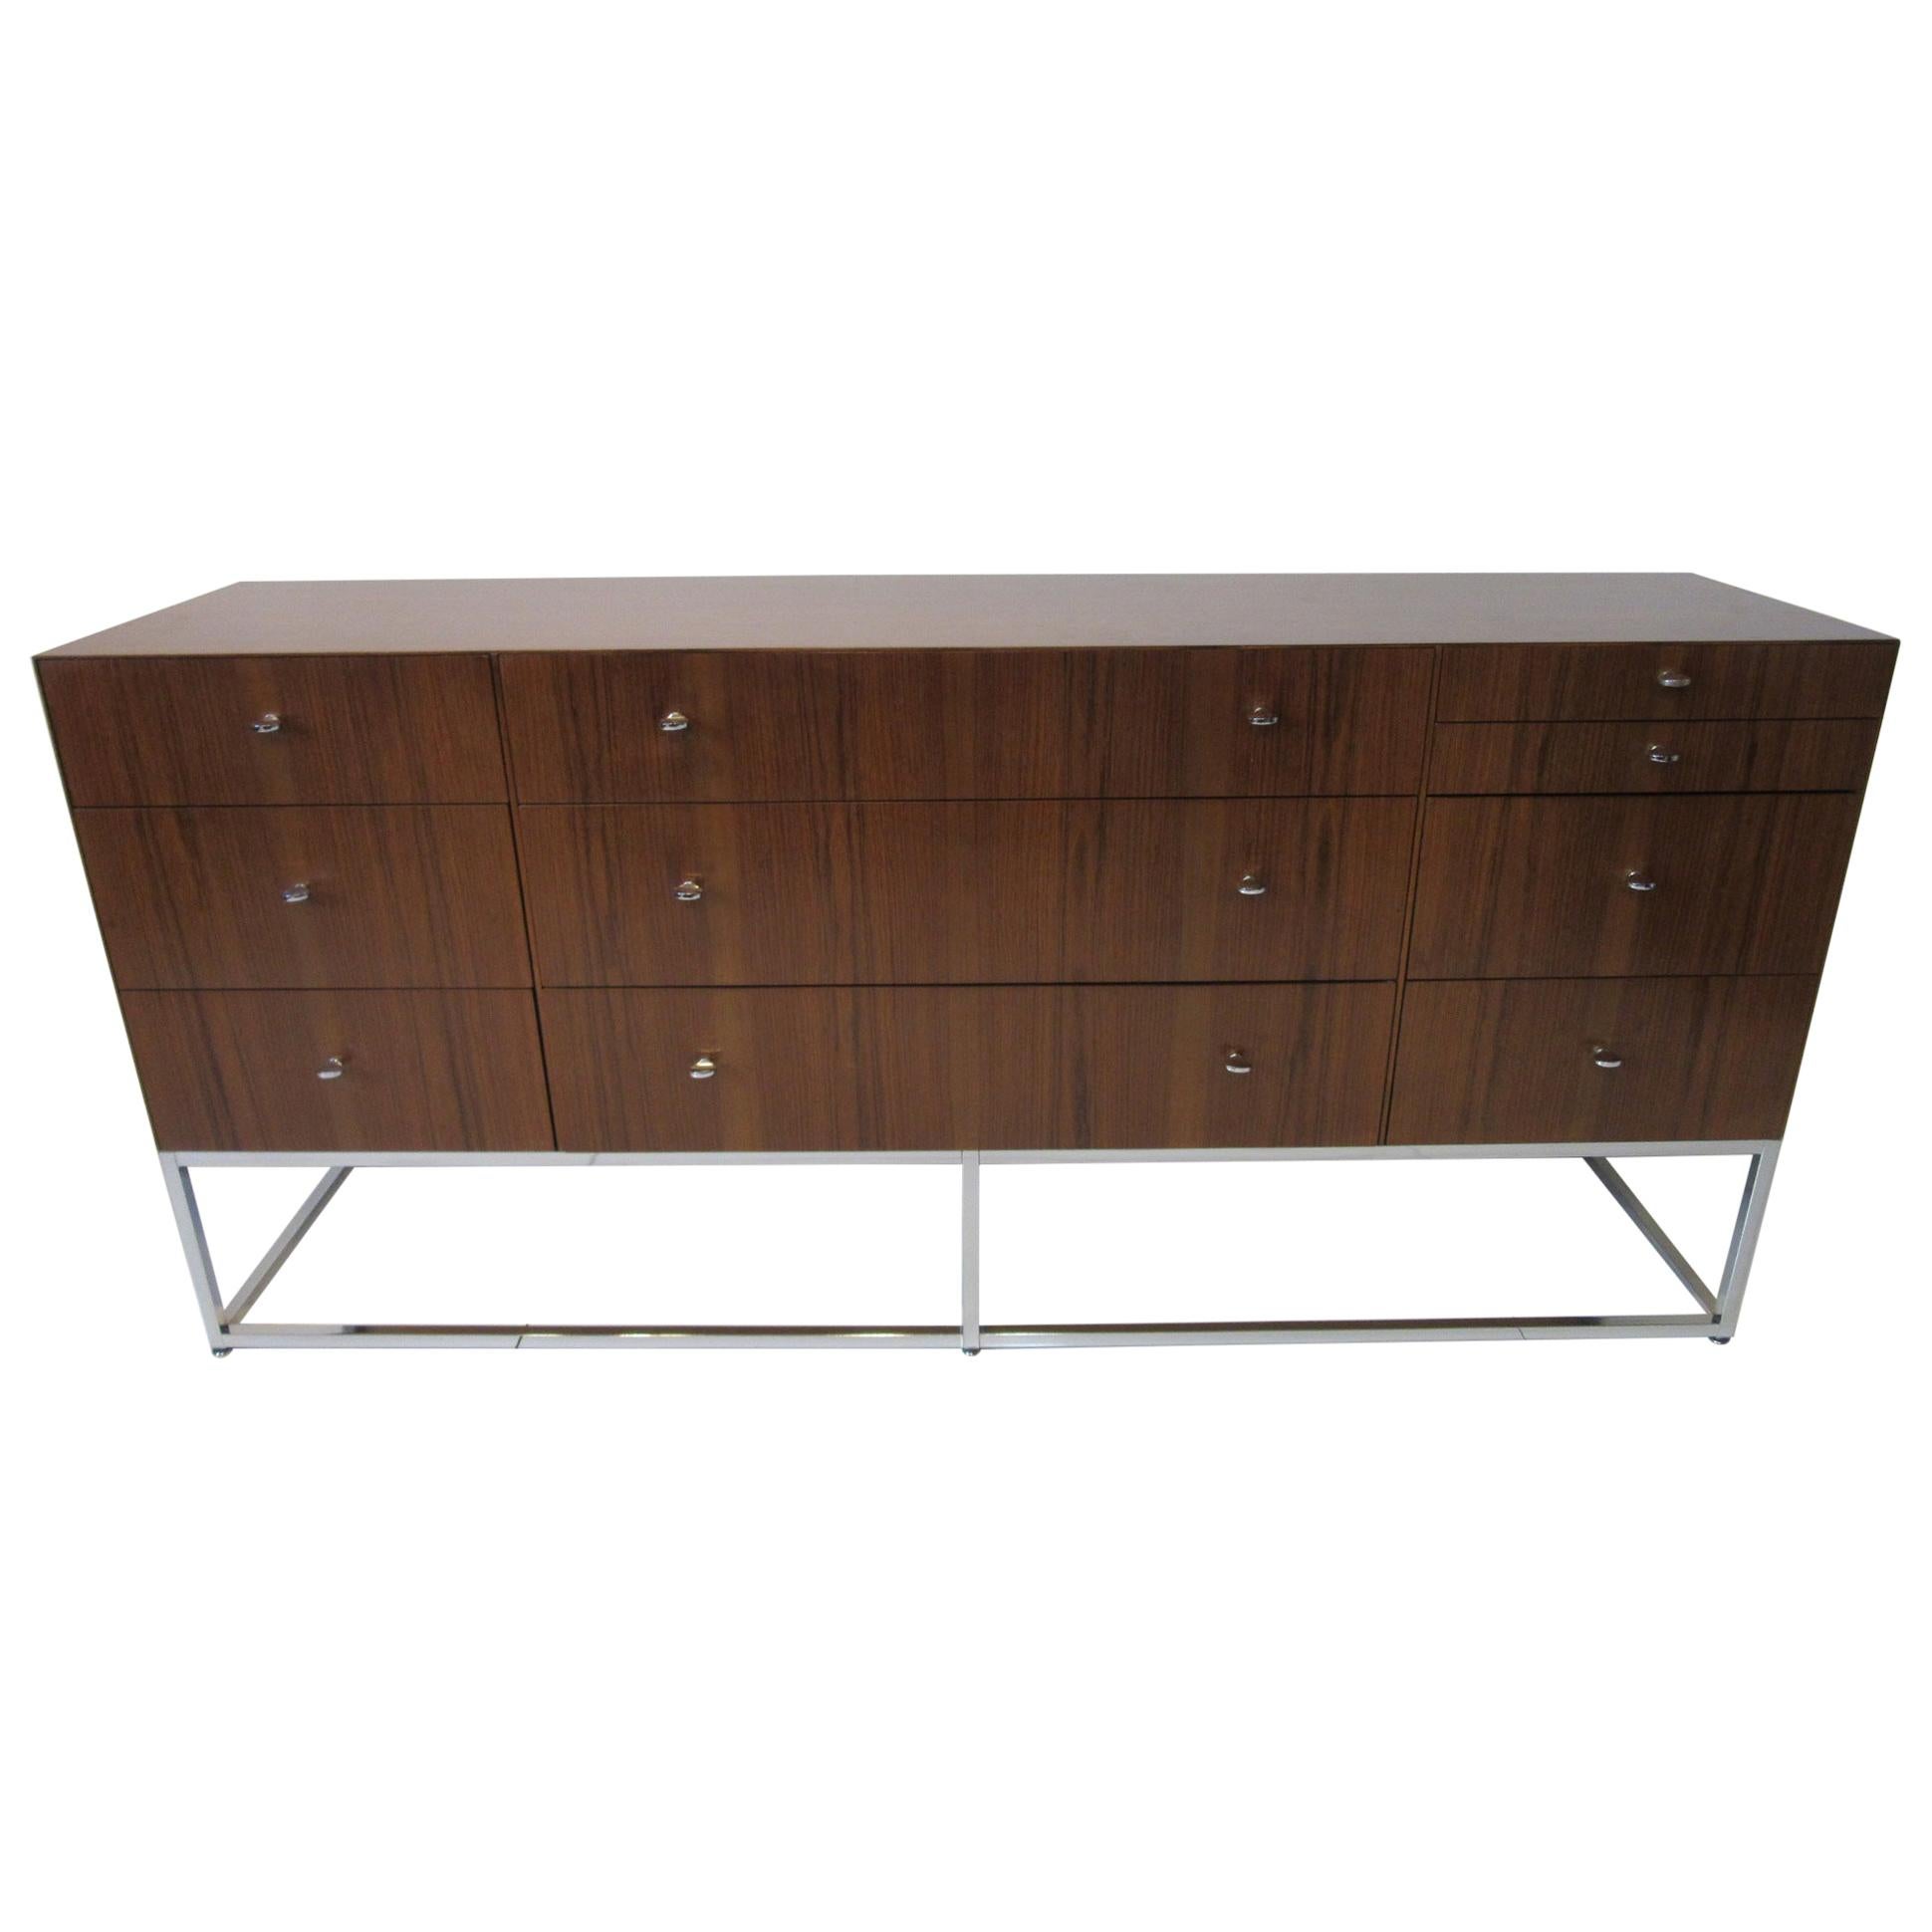 Rosewood and Chrome 10-Drawer Chest /Cabinet / Credenza